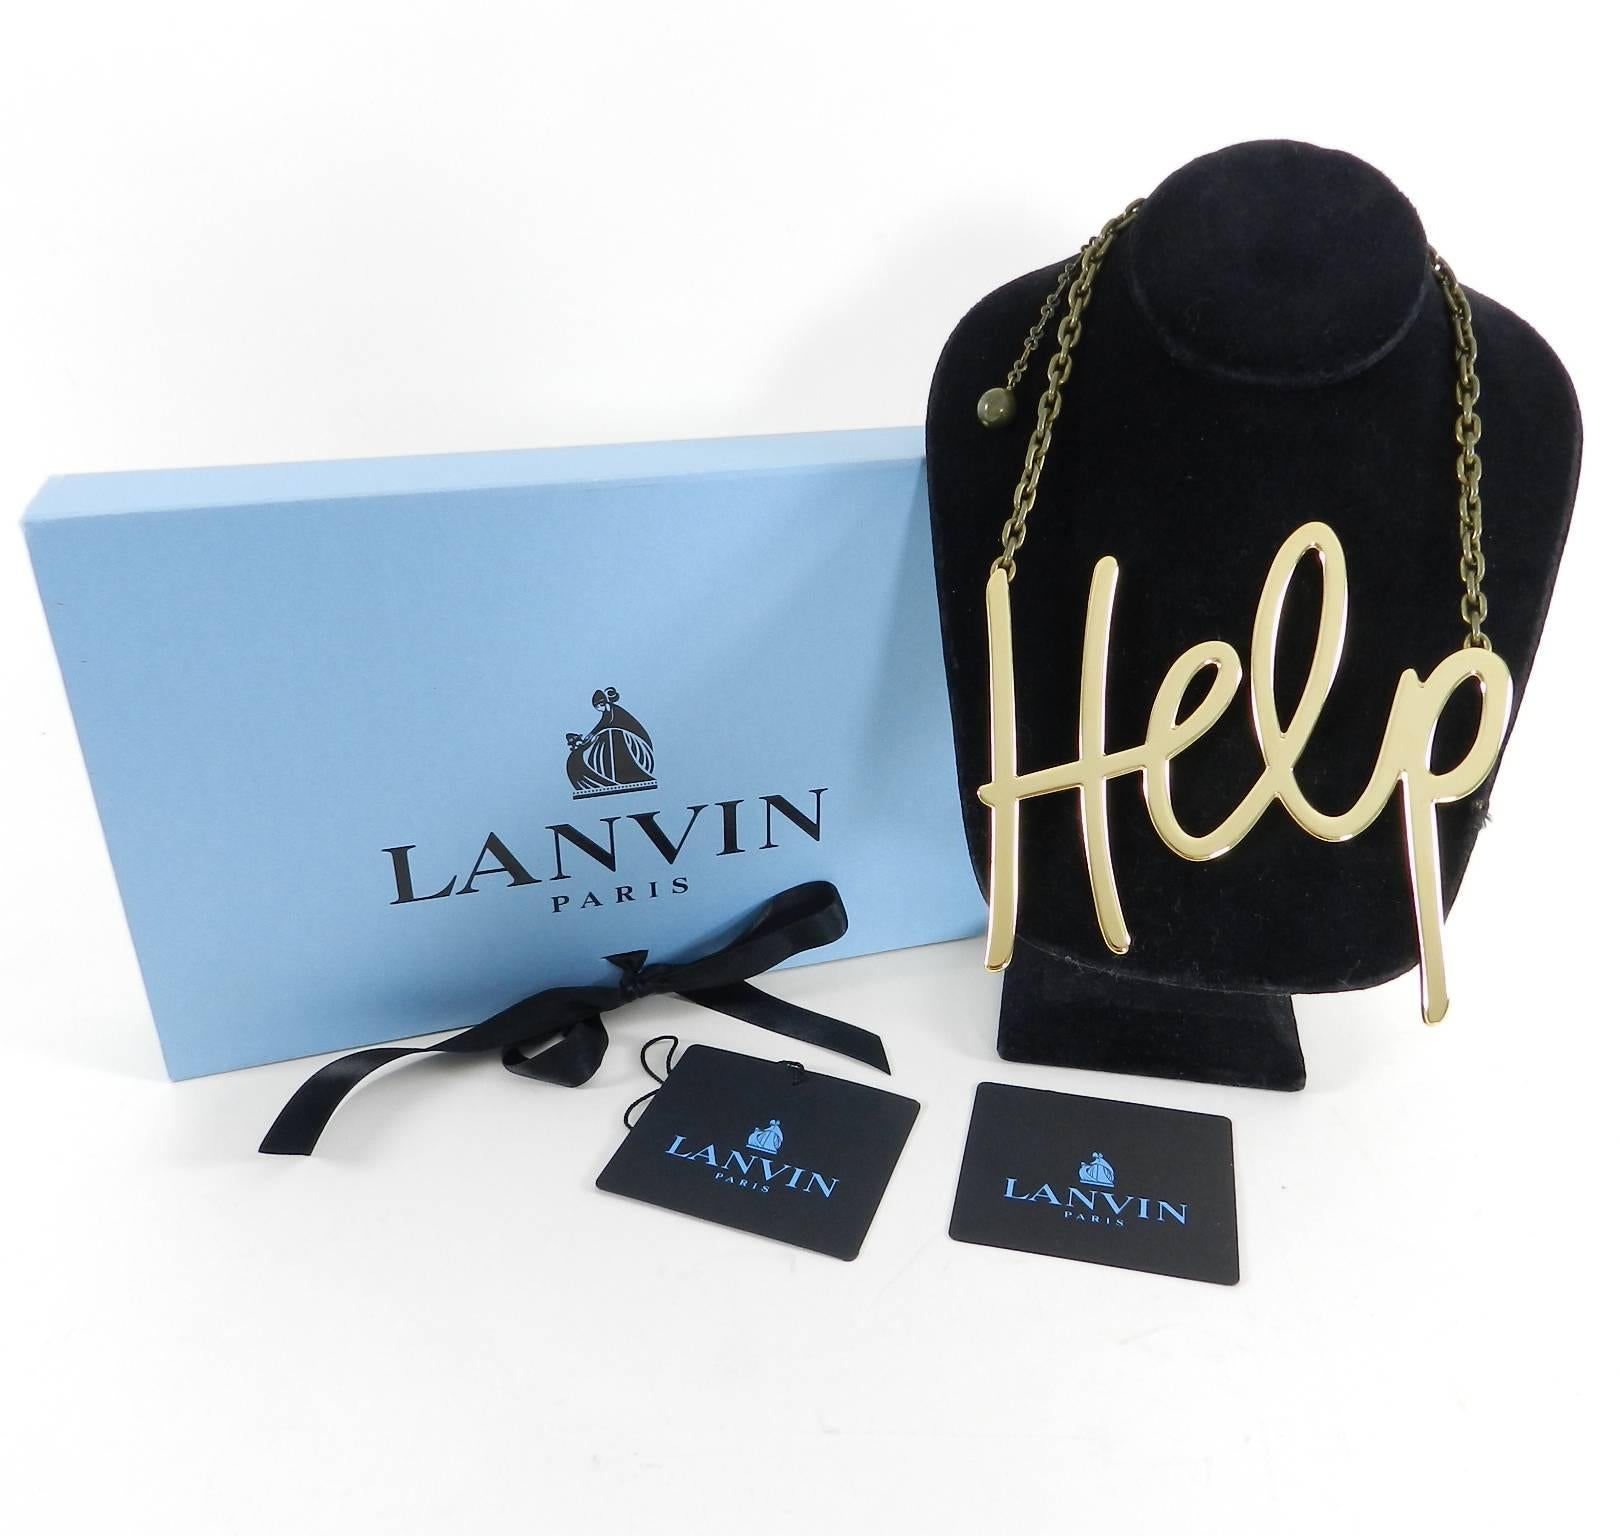 Lanvin Fall 2013 Runway “help” Statement Necklace.  Gold-finish brass pendant with antiqued brass adjustable clasp and Lanvin hang tag. Necklace adjusts from 17.5” - 21” and pendant measures about 5” x 5”.  Excellent pre-owned condition with box.